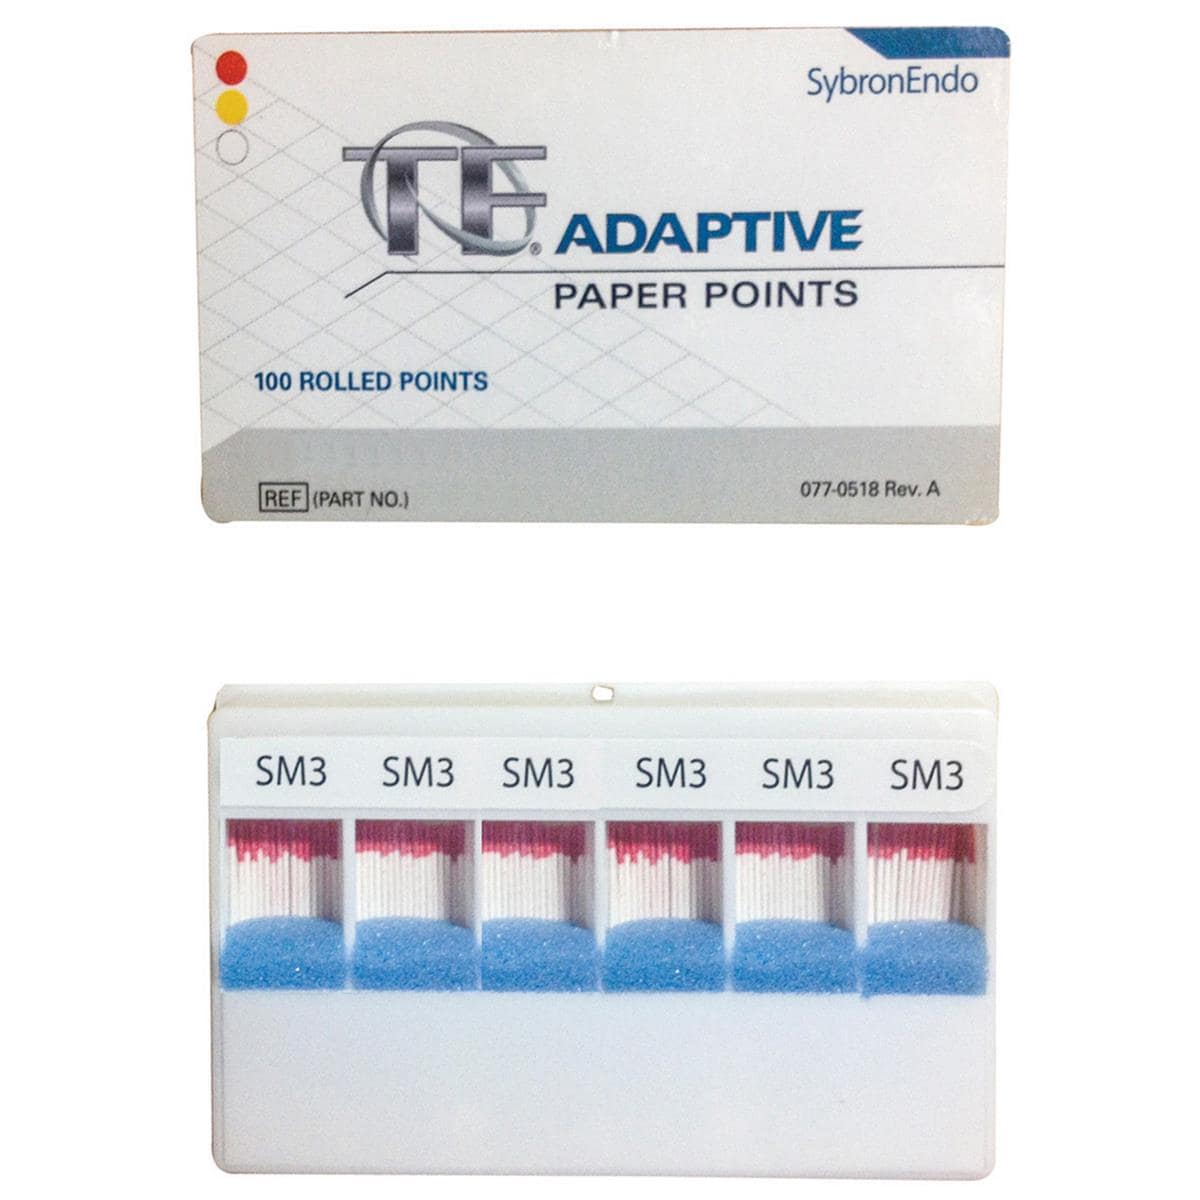 TF Adaptive Paper Points Small Red SM3 100pk